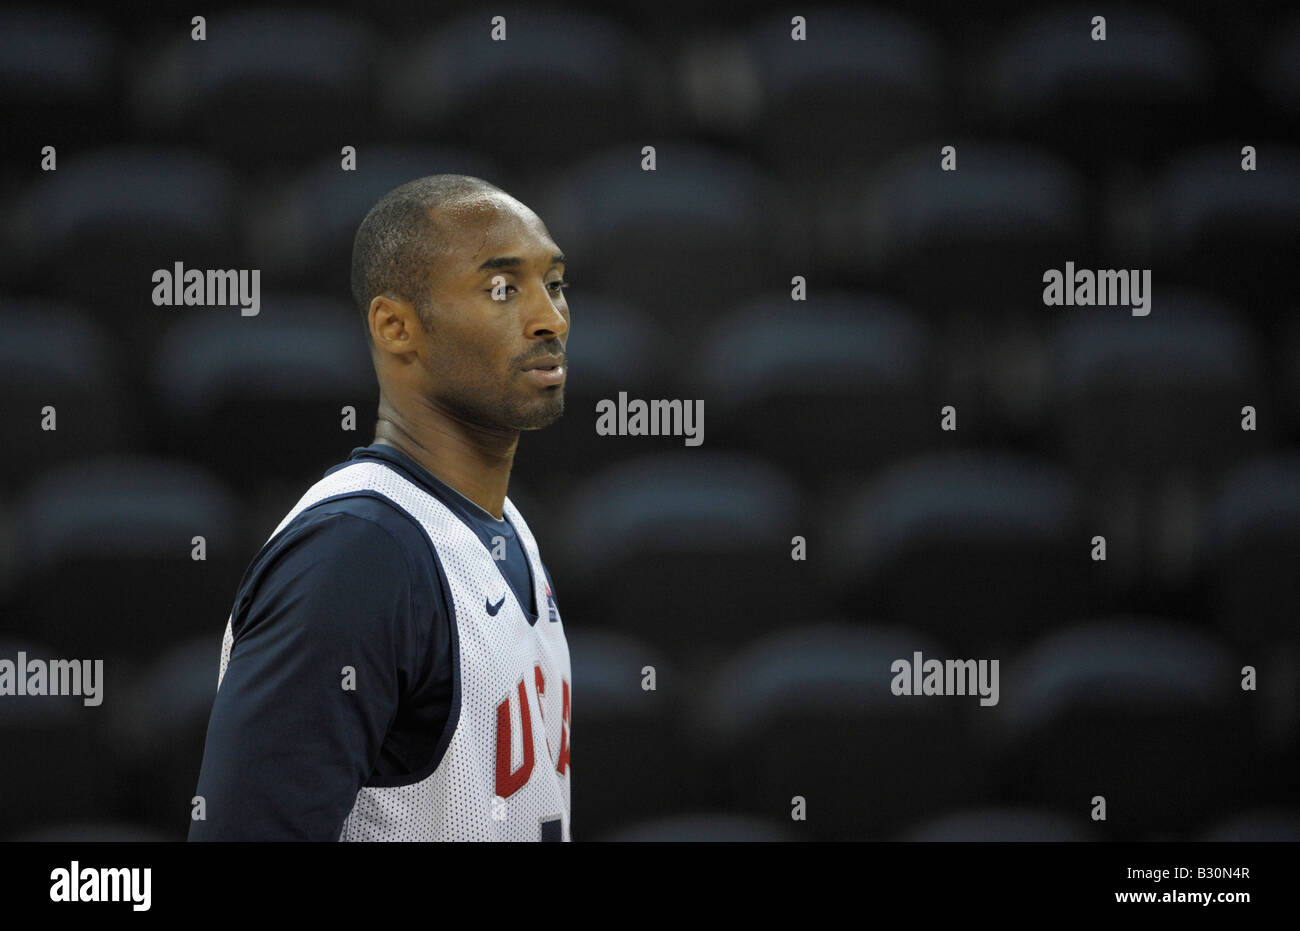 U.S. men senior basketball team player Kobe Bryant attends a training session in Macau, the Beijing 2008 Olympic Games Stock Photo